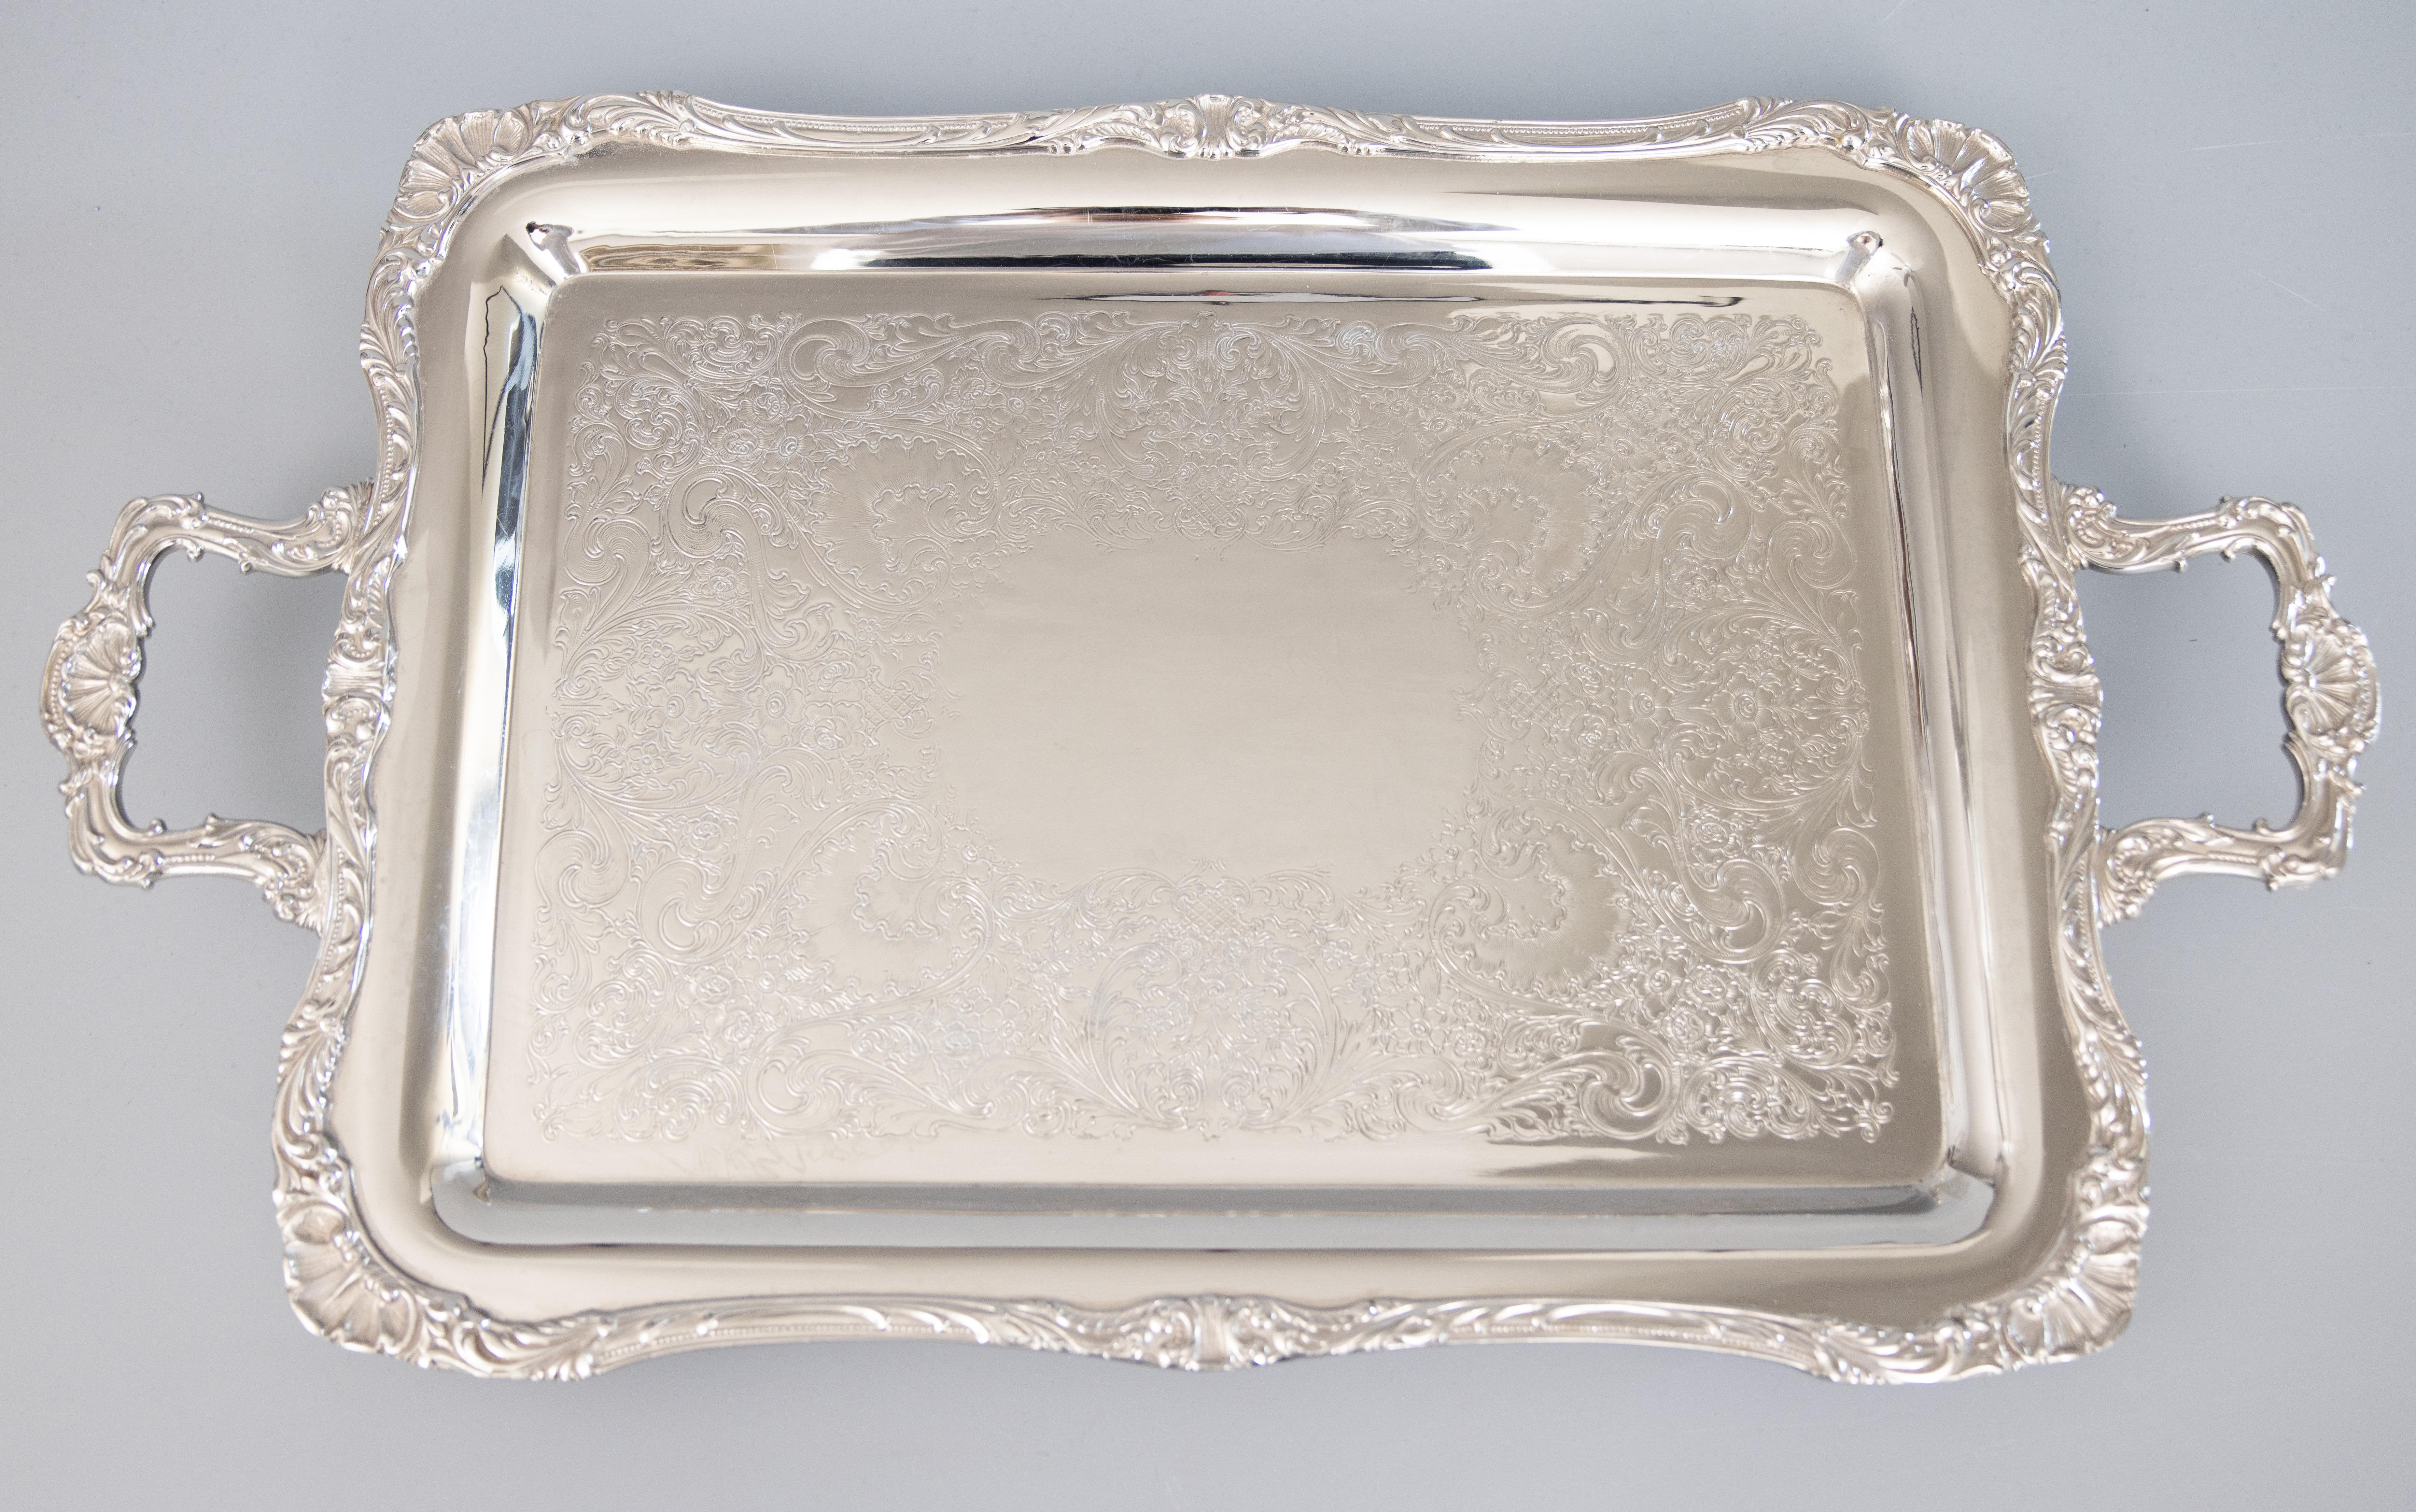 A superb early to mid-20th century silverplated rectangular footed serving tray by Rogers & Bro. Maker's mark on reverse. This fine quality silver tray is heavy and well made with gorgeous details on the edges, handles, and feet. It would be